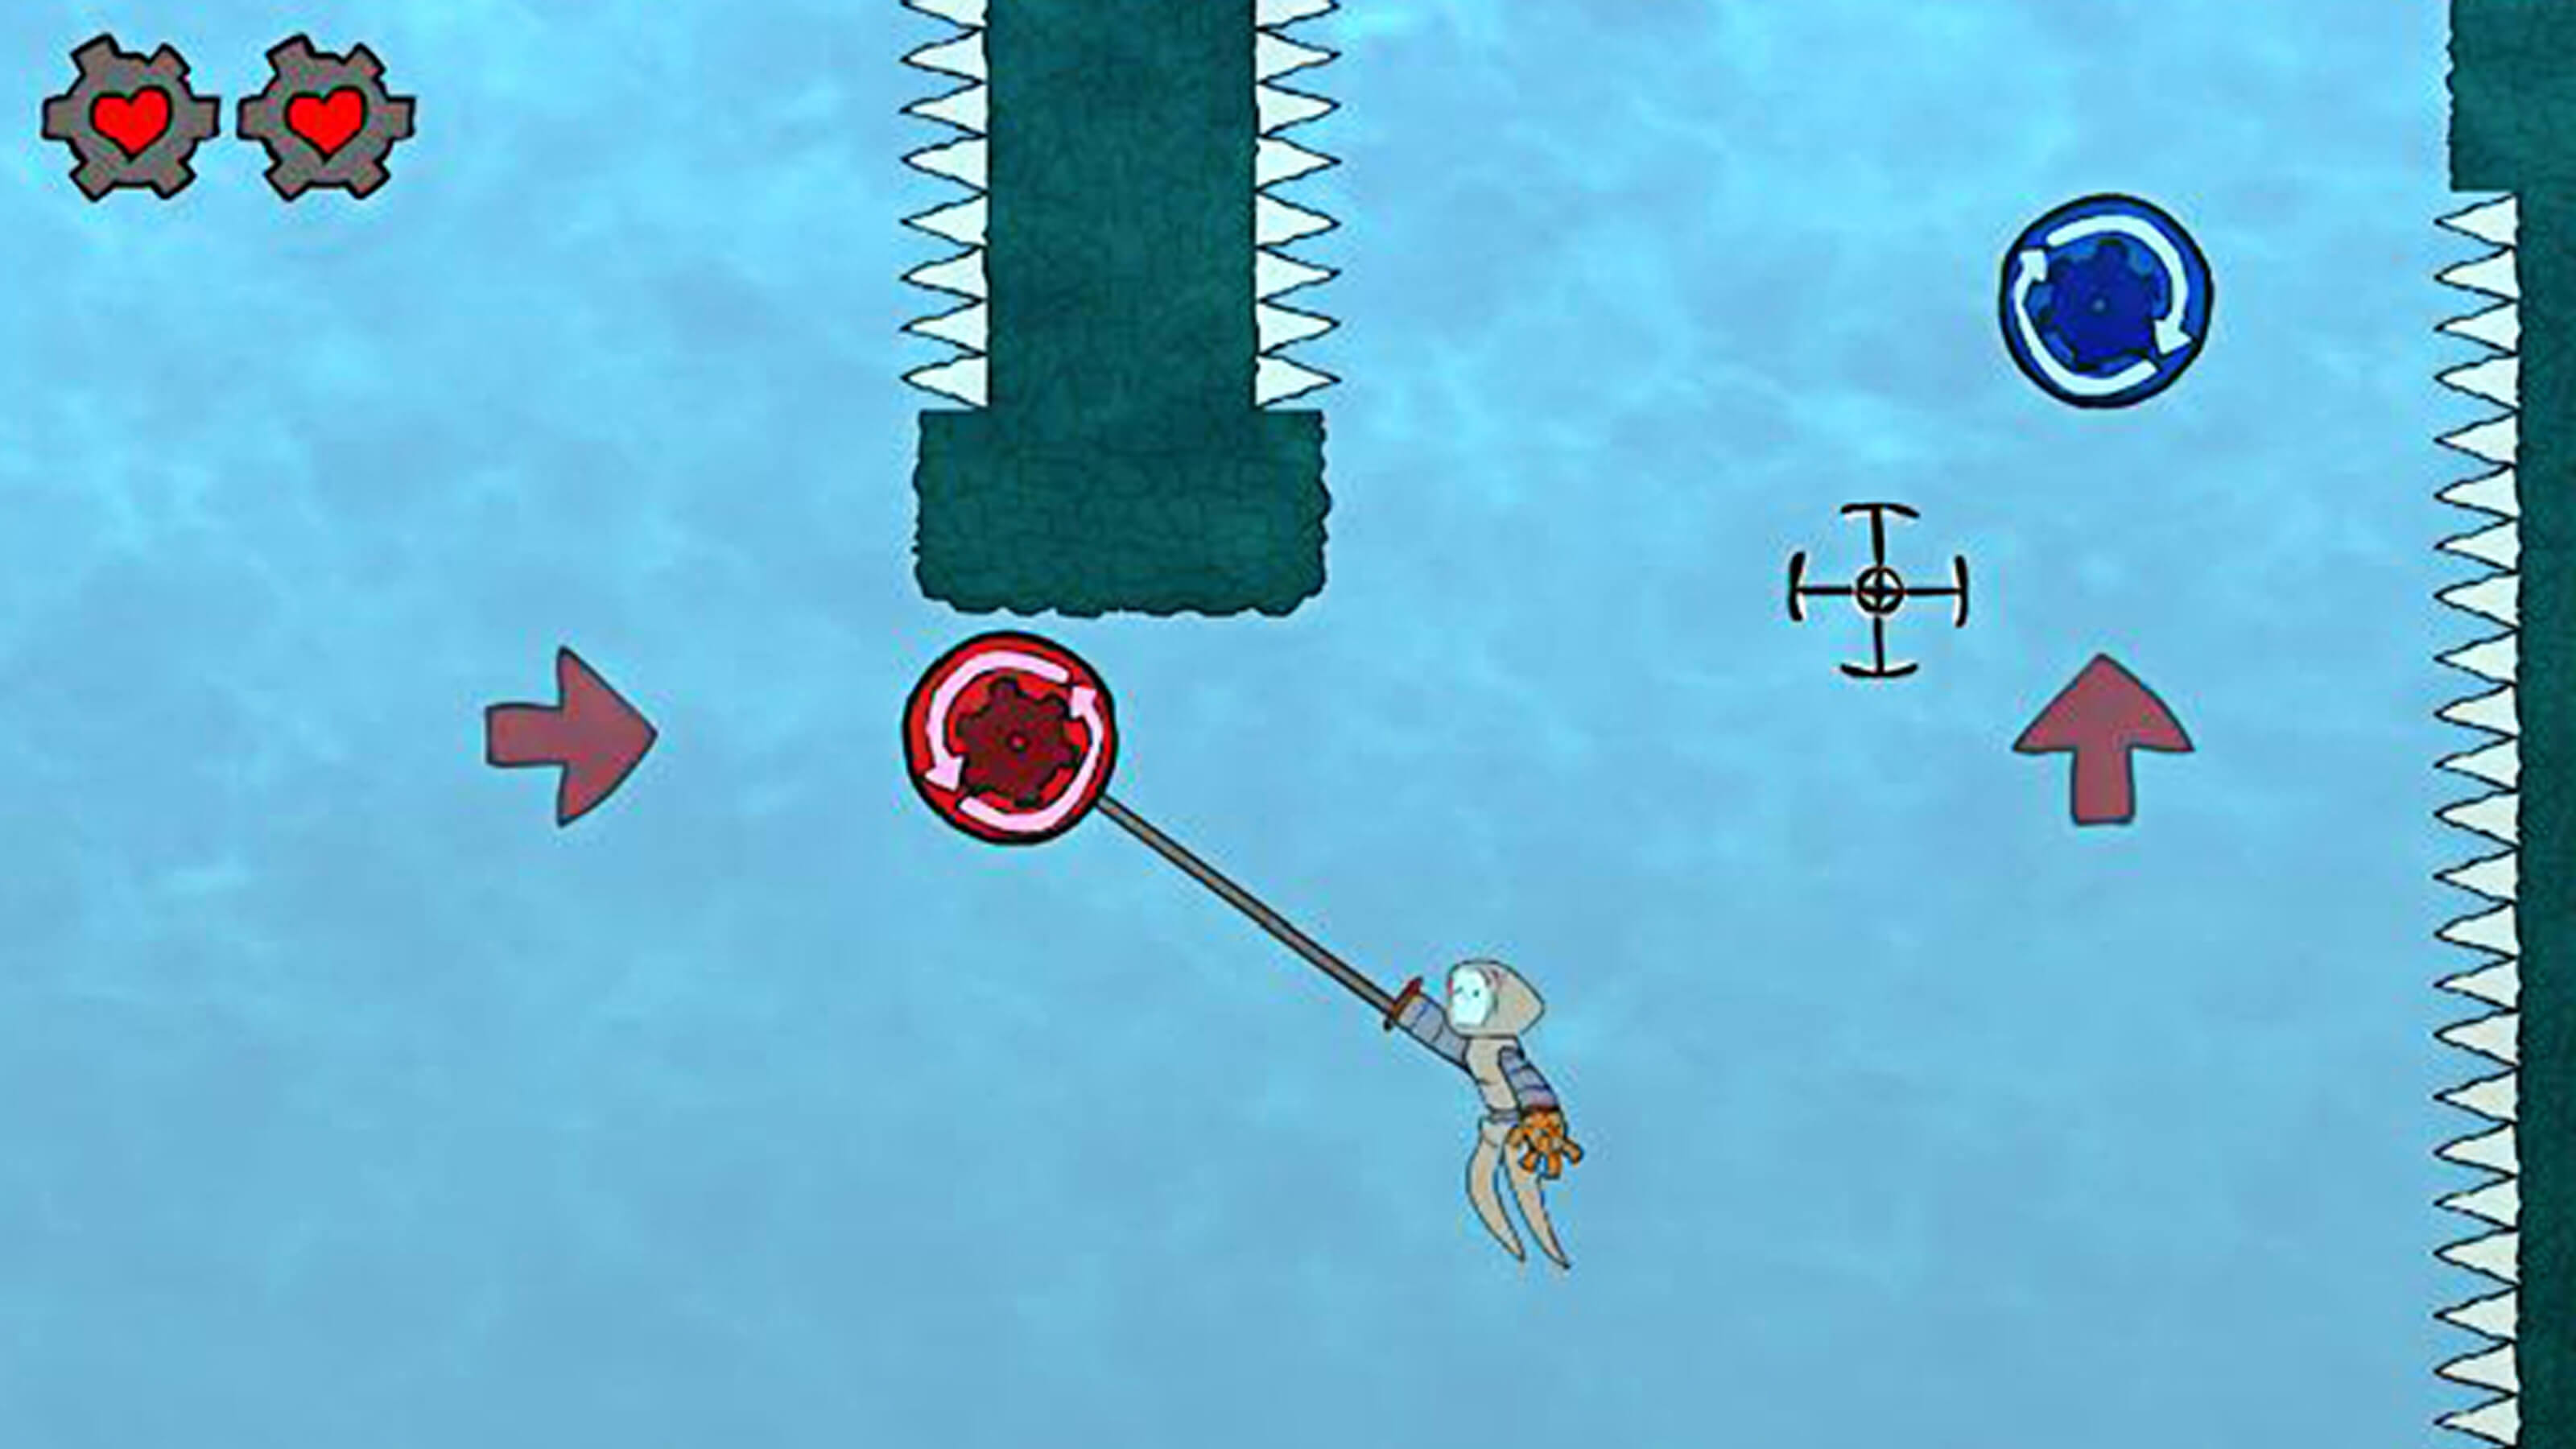 A robot-like character swings by an underwater cog with its extended gear hand.